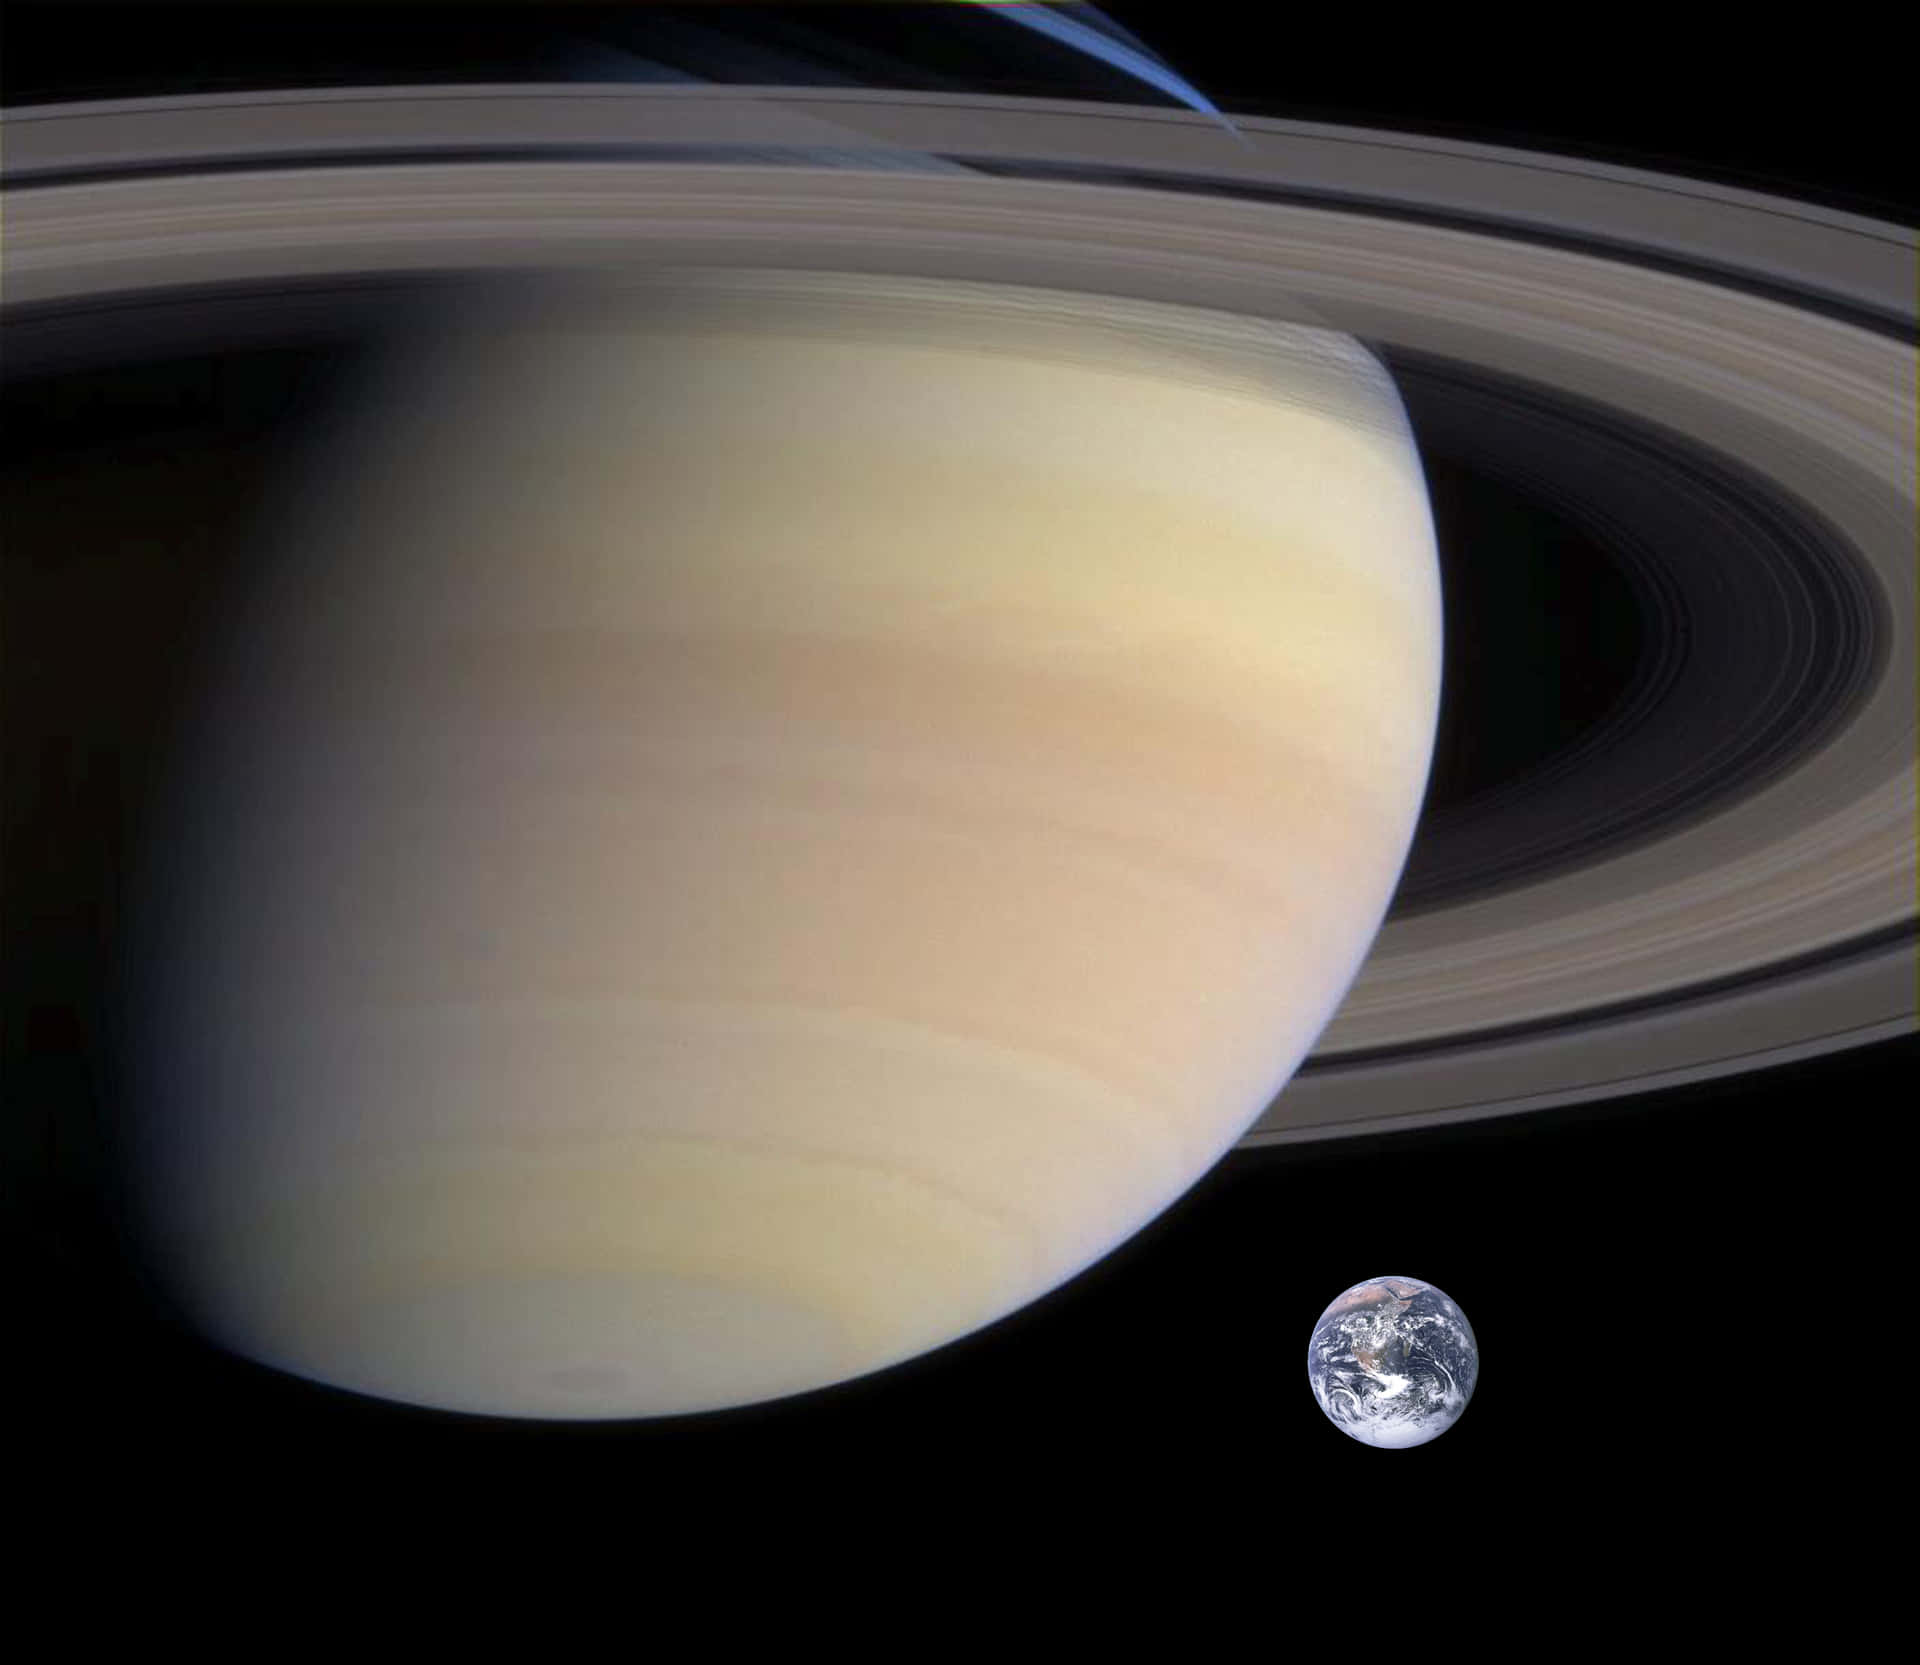 Saturn's magnificent rings seen from space